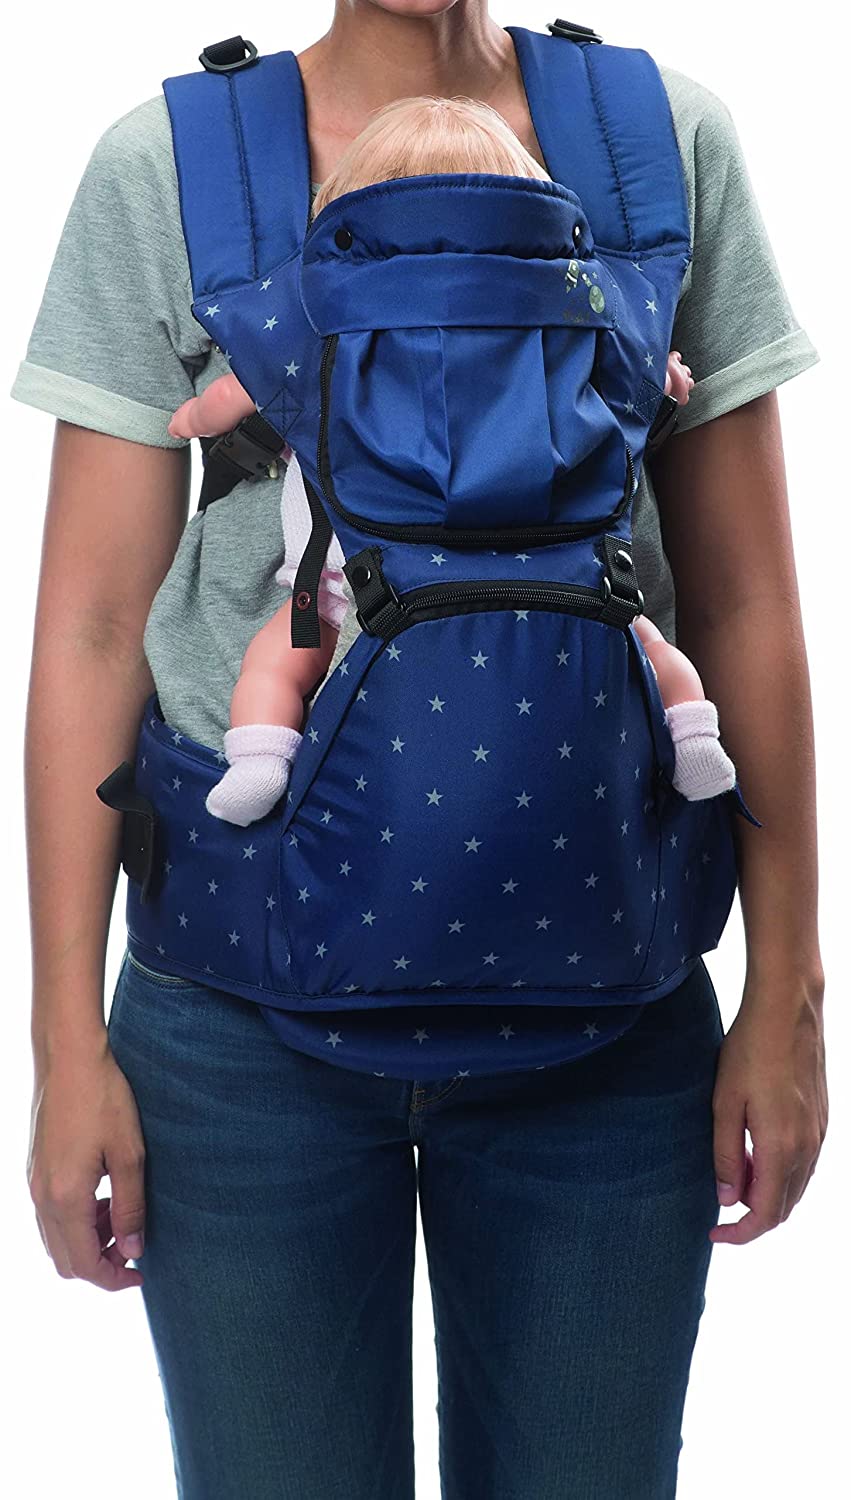 Child Carrier blue stars Mochi Play